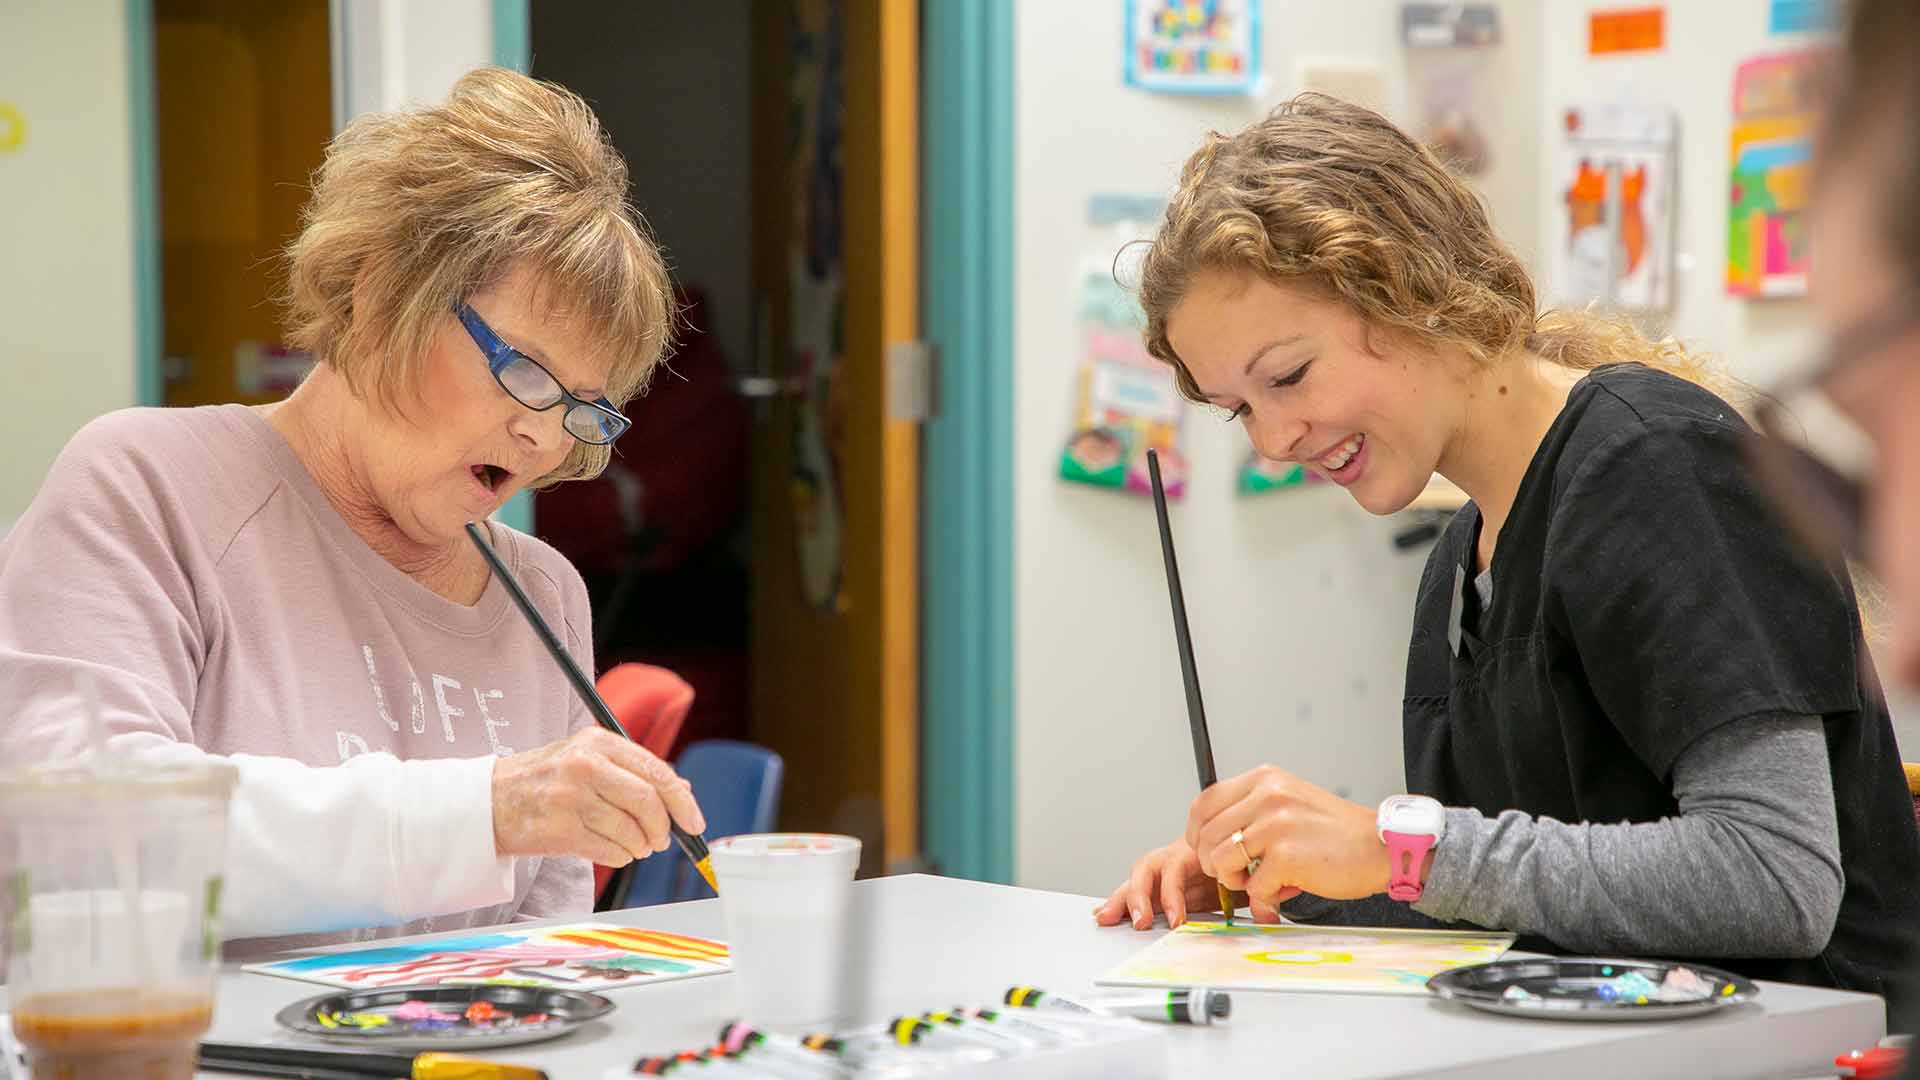 A speech-language student paints with an adult patient during a group therapy session